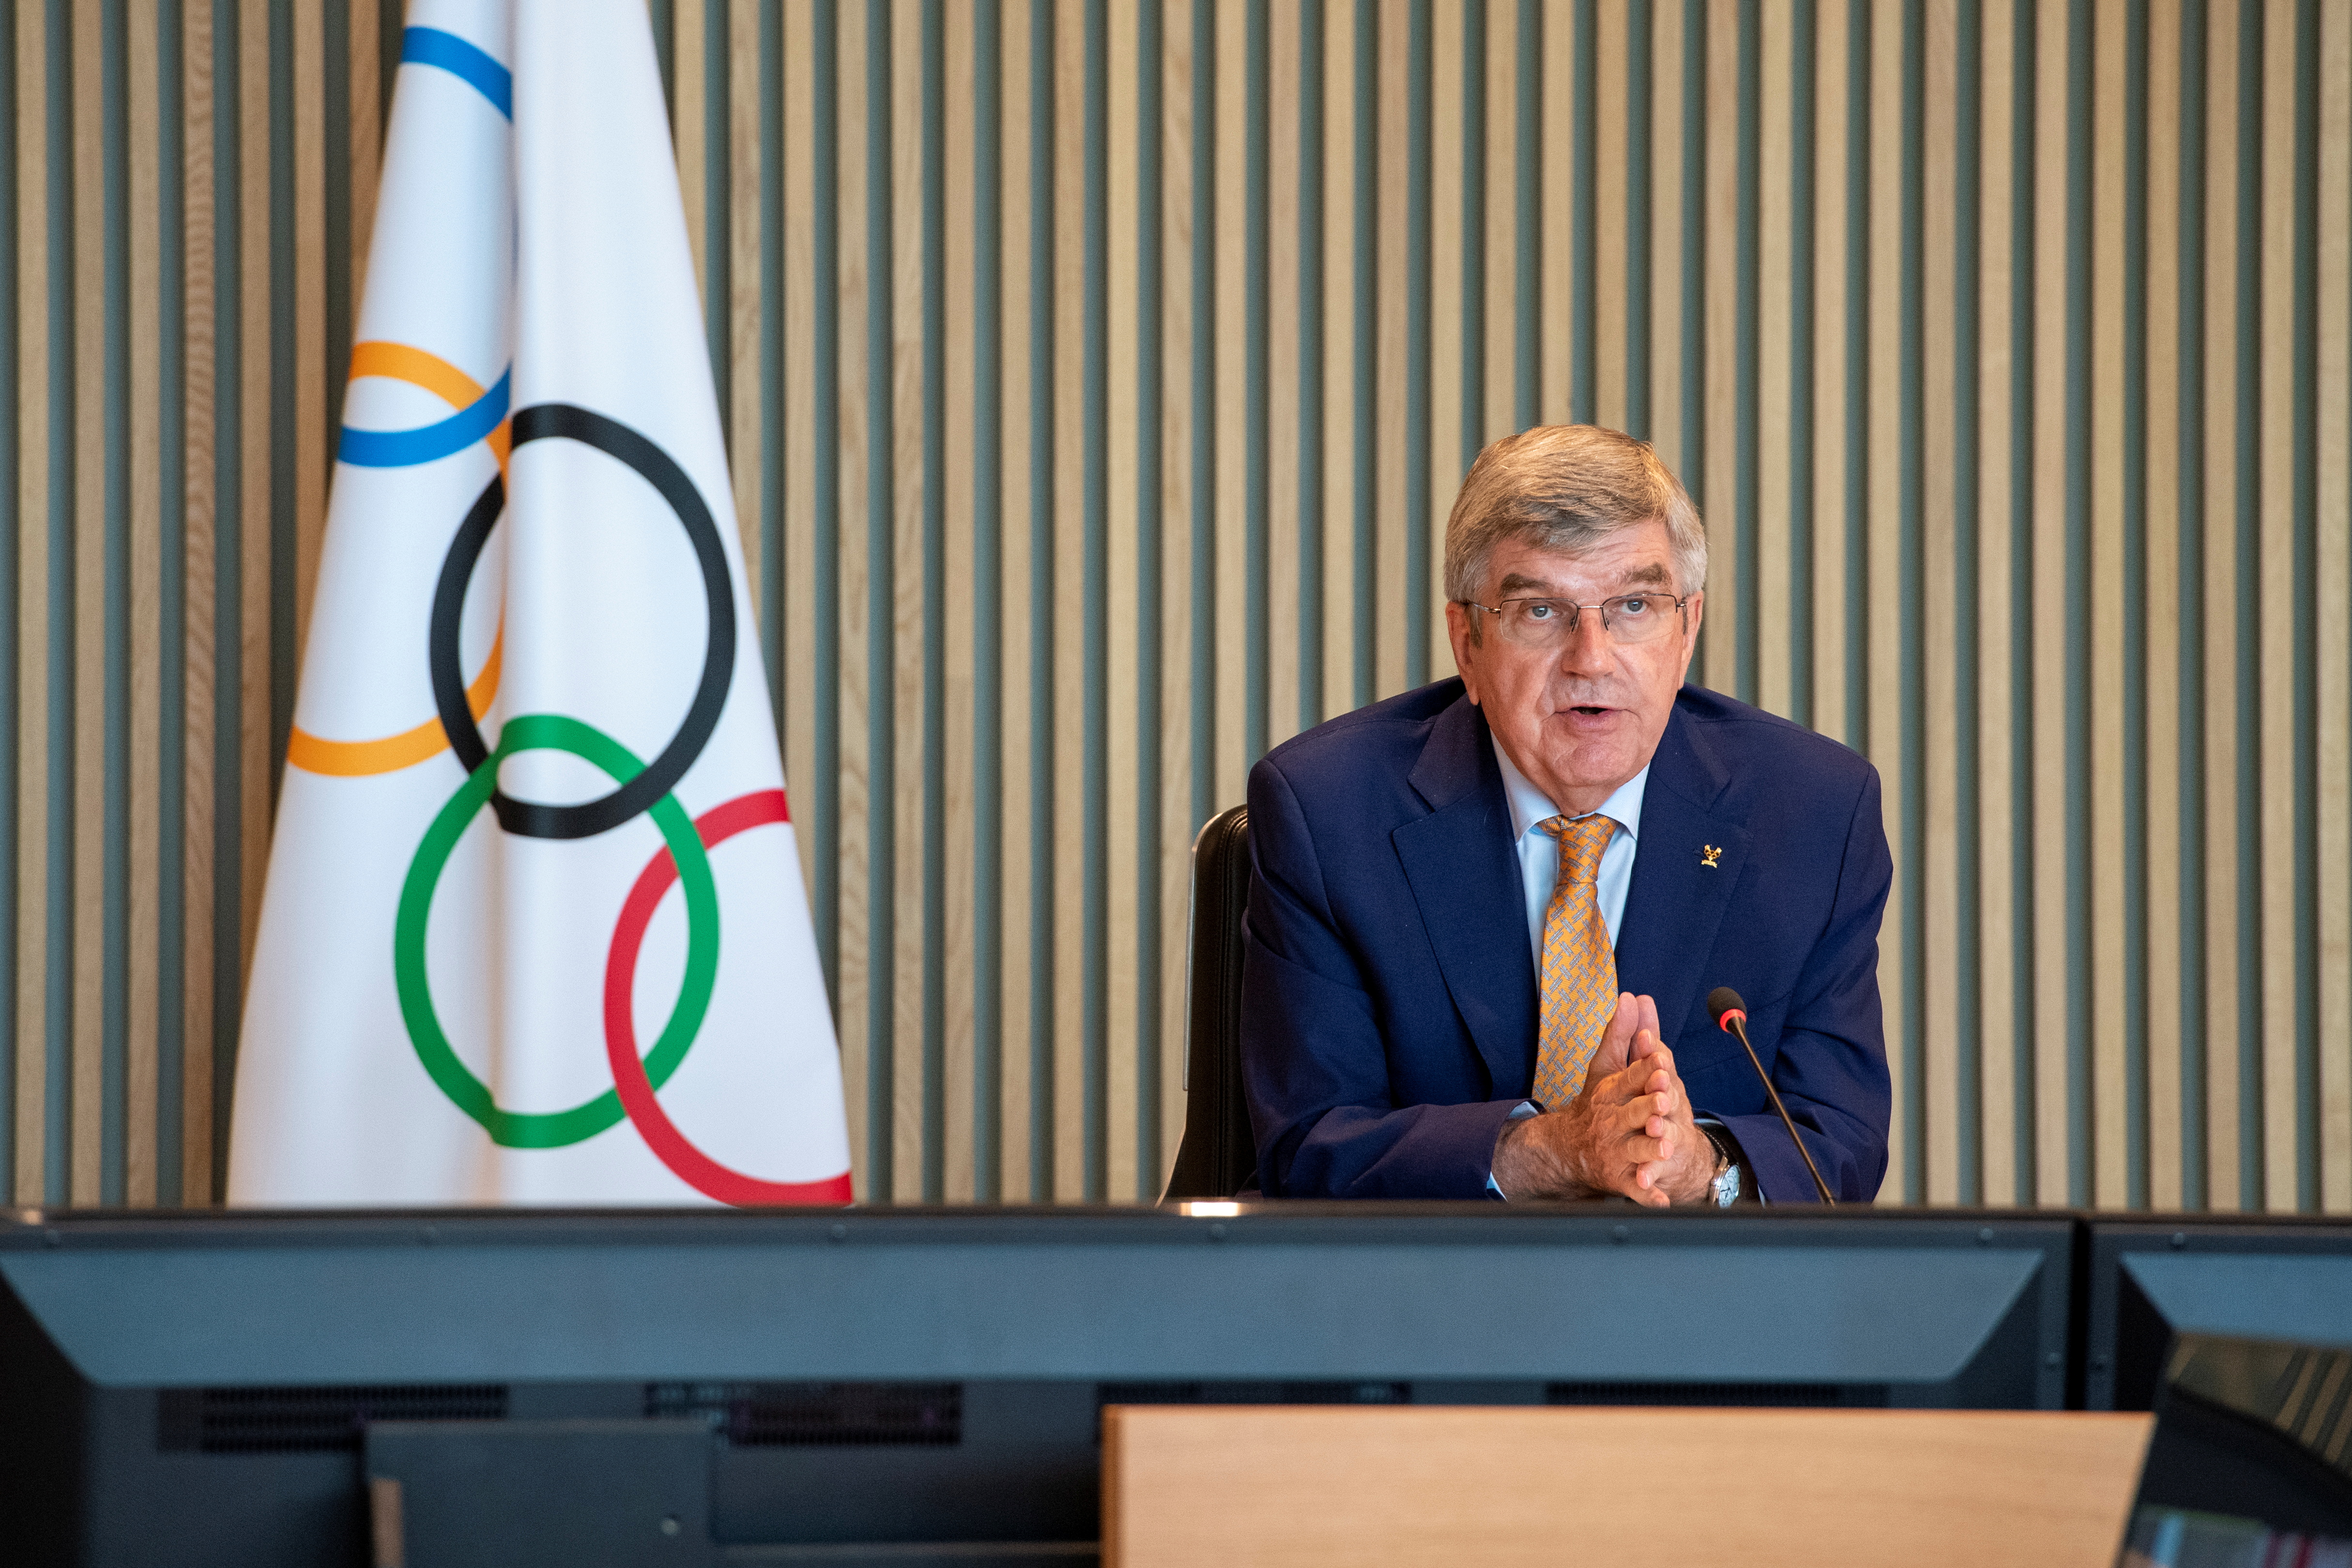 International Olympic Committee (IOC) President Thomas Bach attends the Executive Board virtual meeting at the Olympic House in Lausanne, Switzerland, September 8, 2021. Philippe Woods/IOC/Handout via REUTERS 